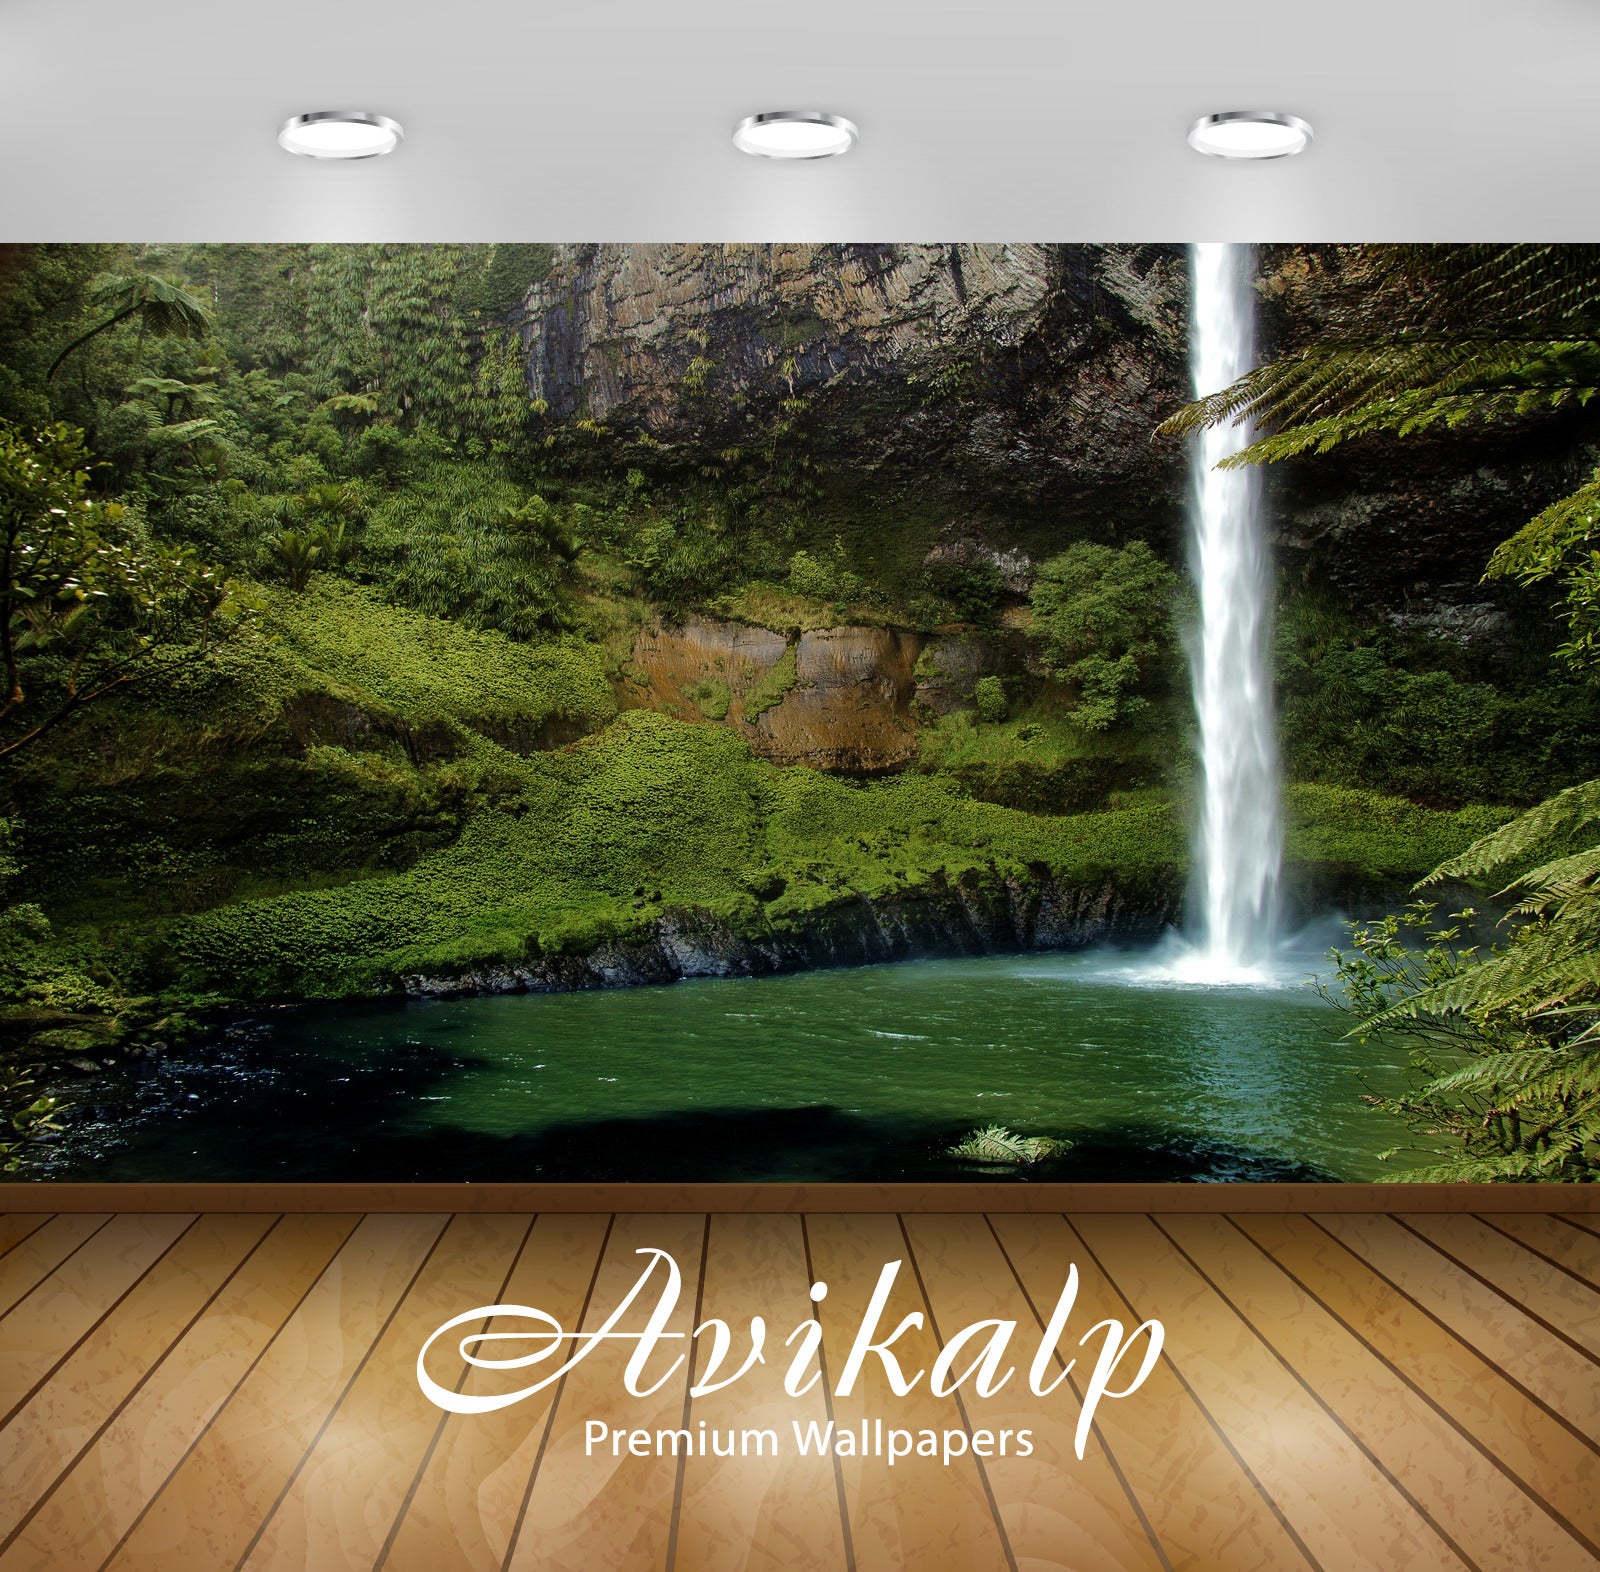 Avikalp Exclusive Awi4975 Bridal Veil Fall Waterfall Mountain Full HD Wallpapers for Living room, Ha